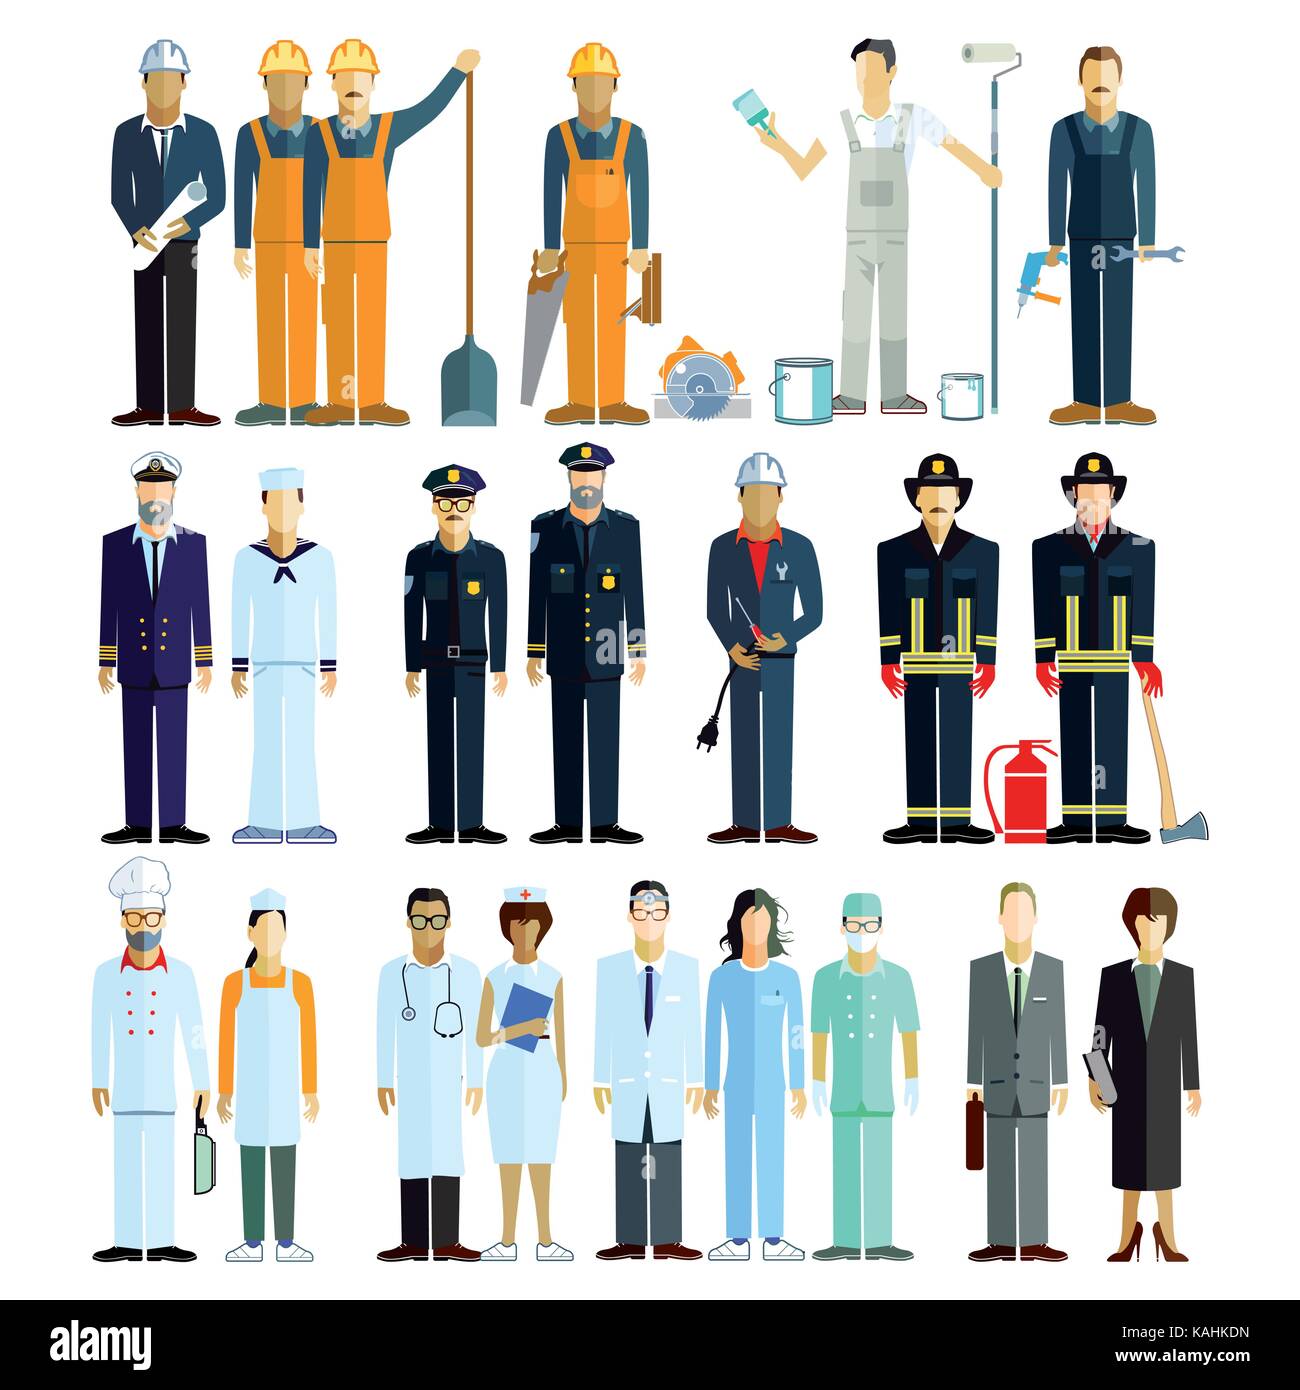 Occupations Stock Vector Images - Alamy